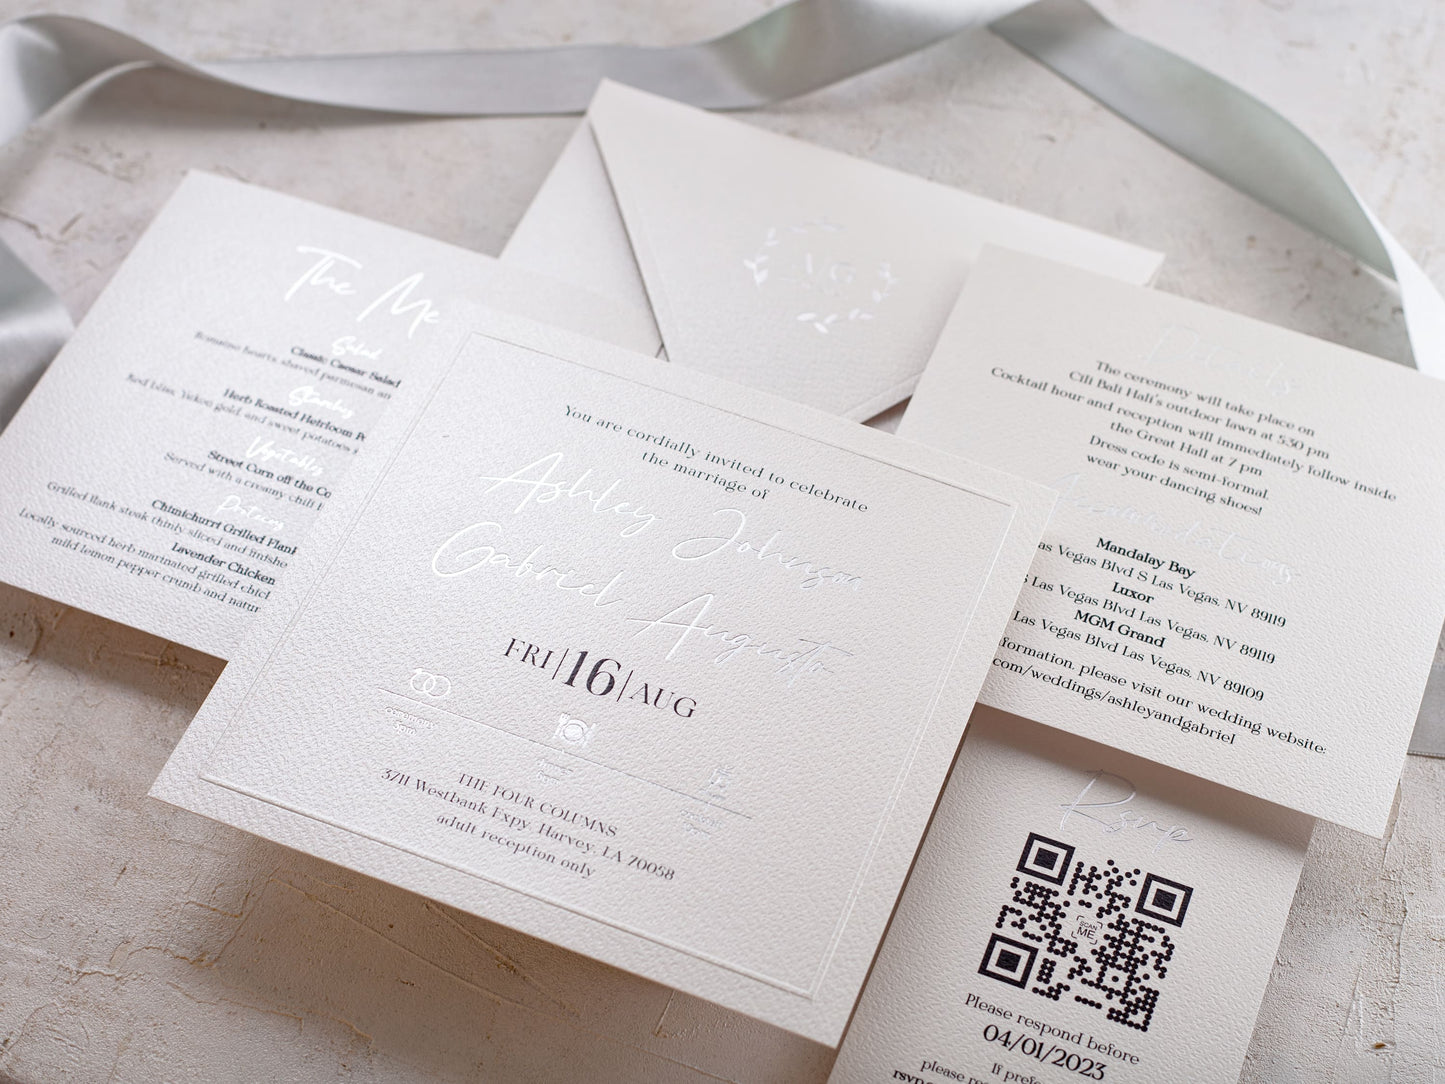 White and silver wedding invitation with rsvp card, details card, menu card